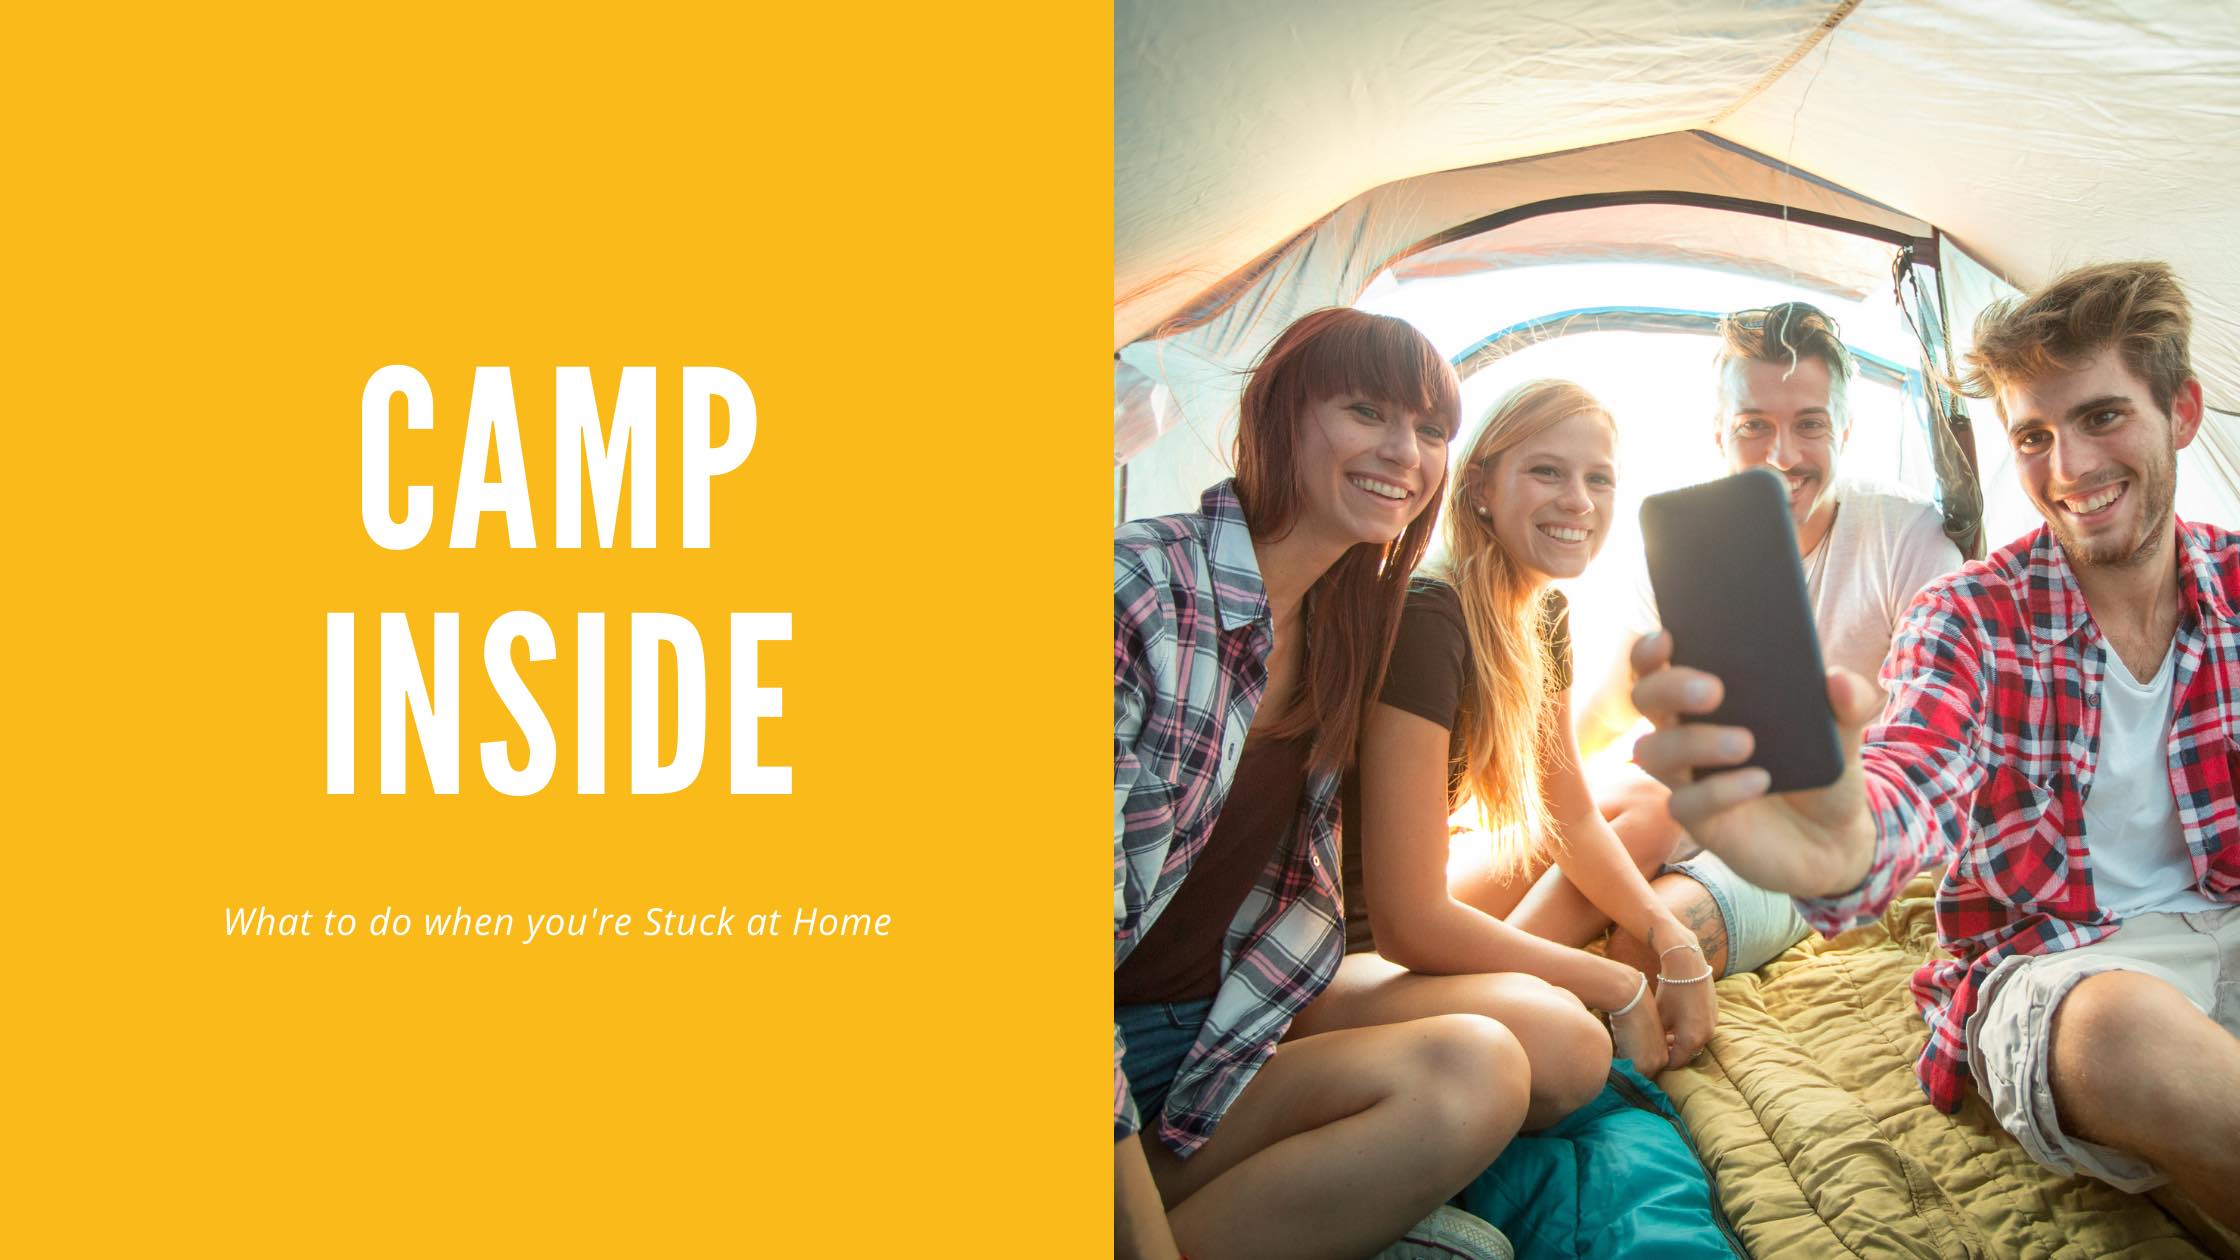 A fun thing to do while you're stuck at home is to camp inside.